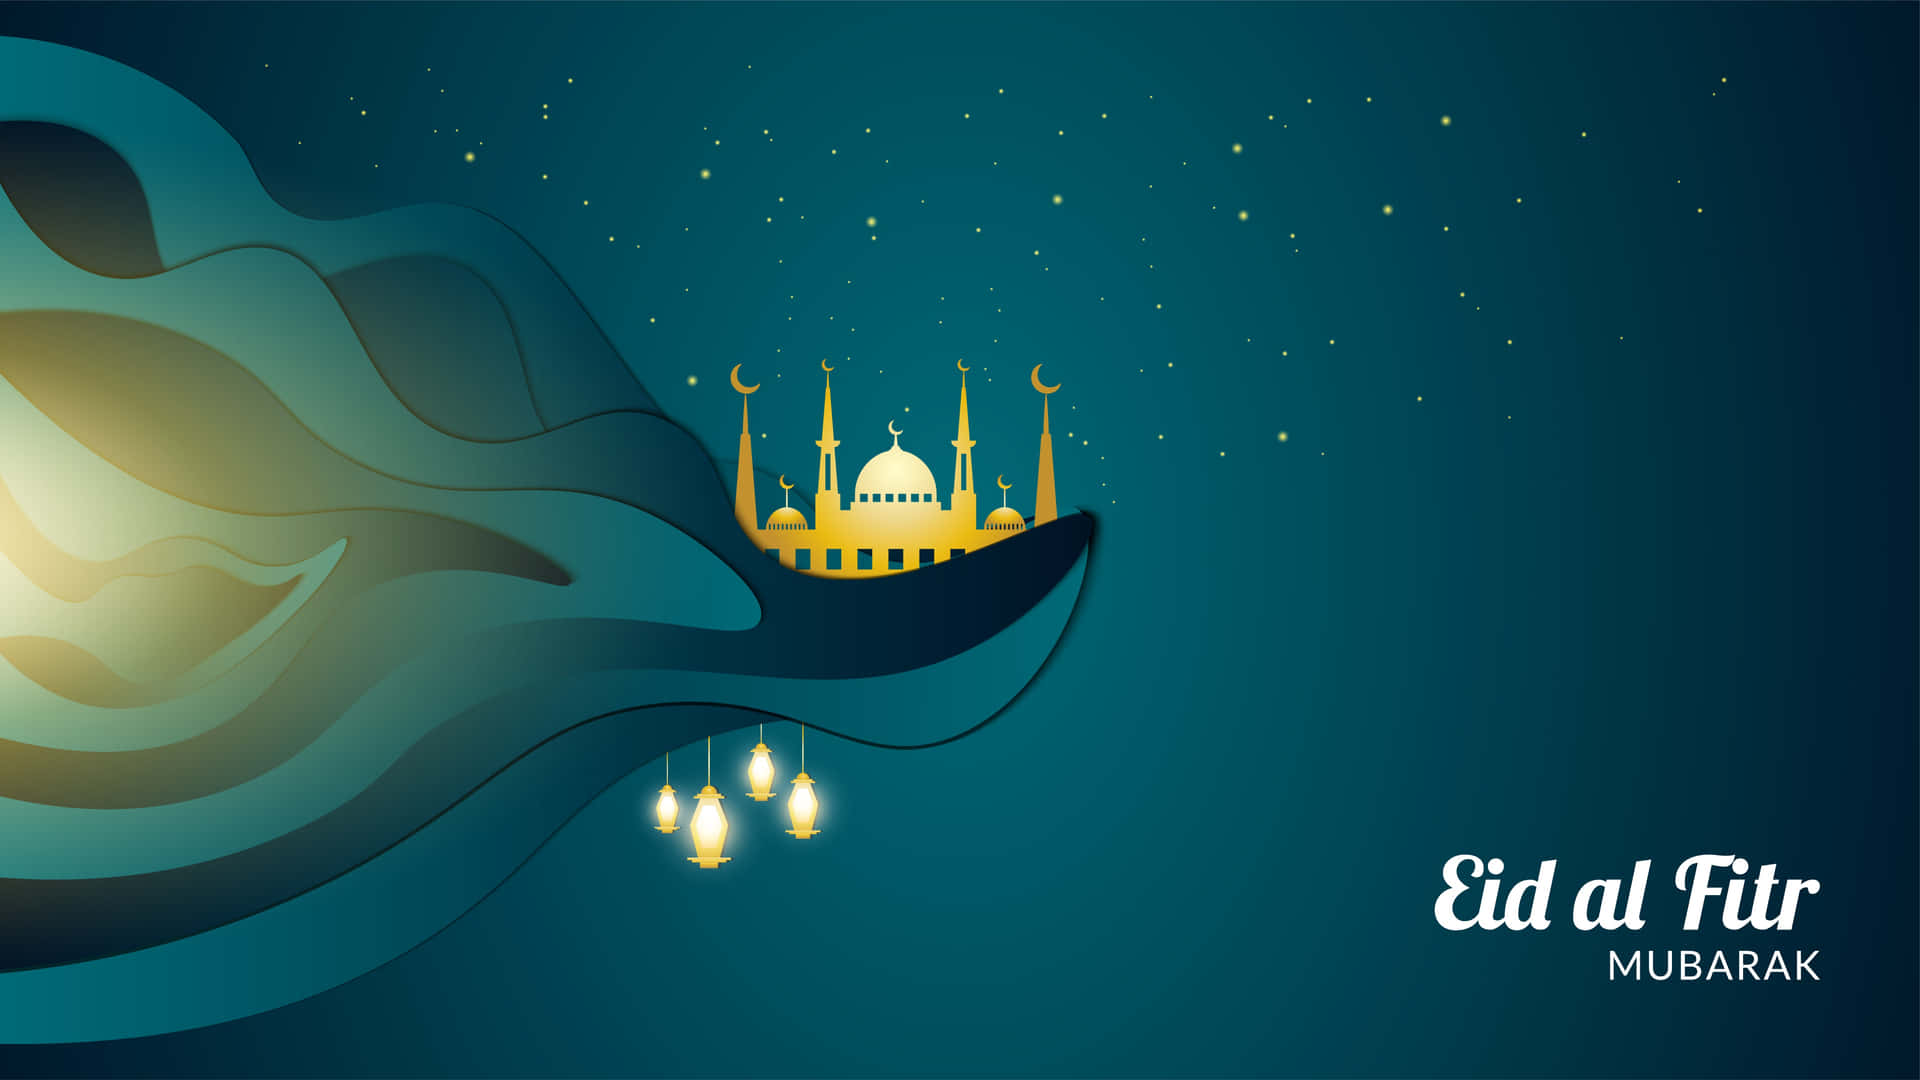 Eid Al-firah Background With A Mosque And Lanterns